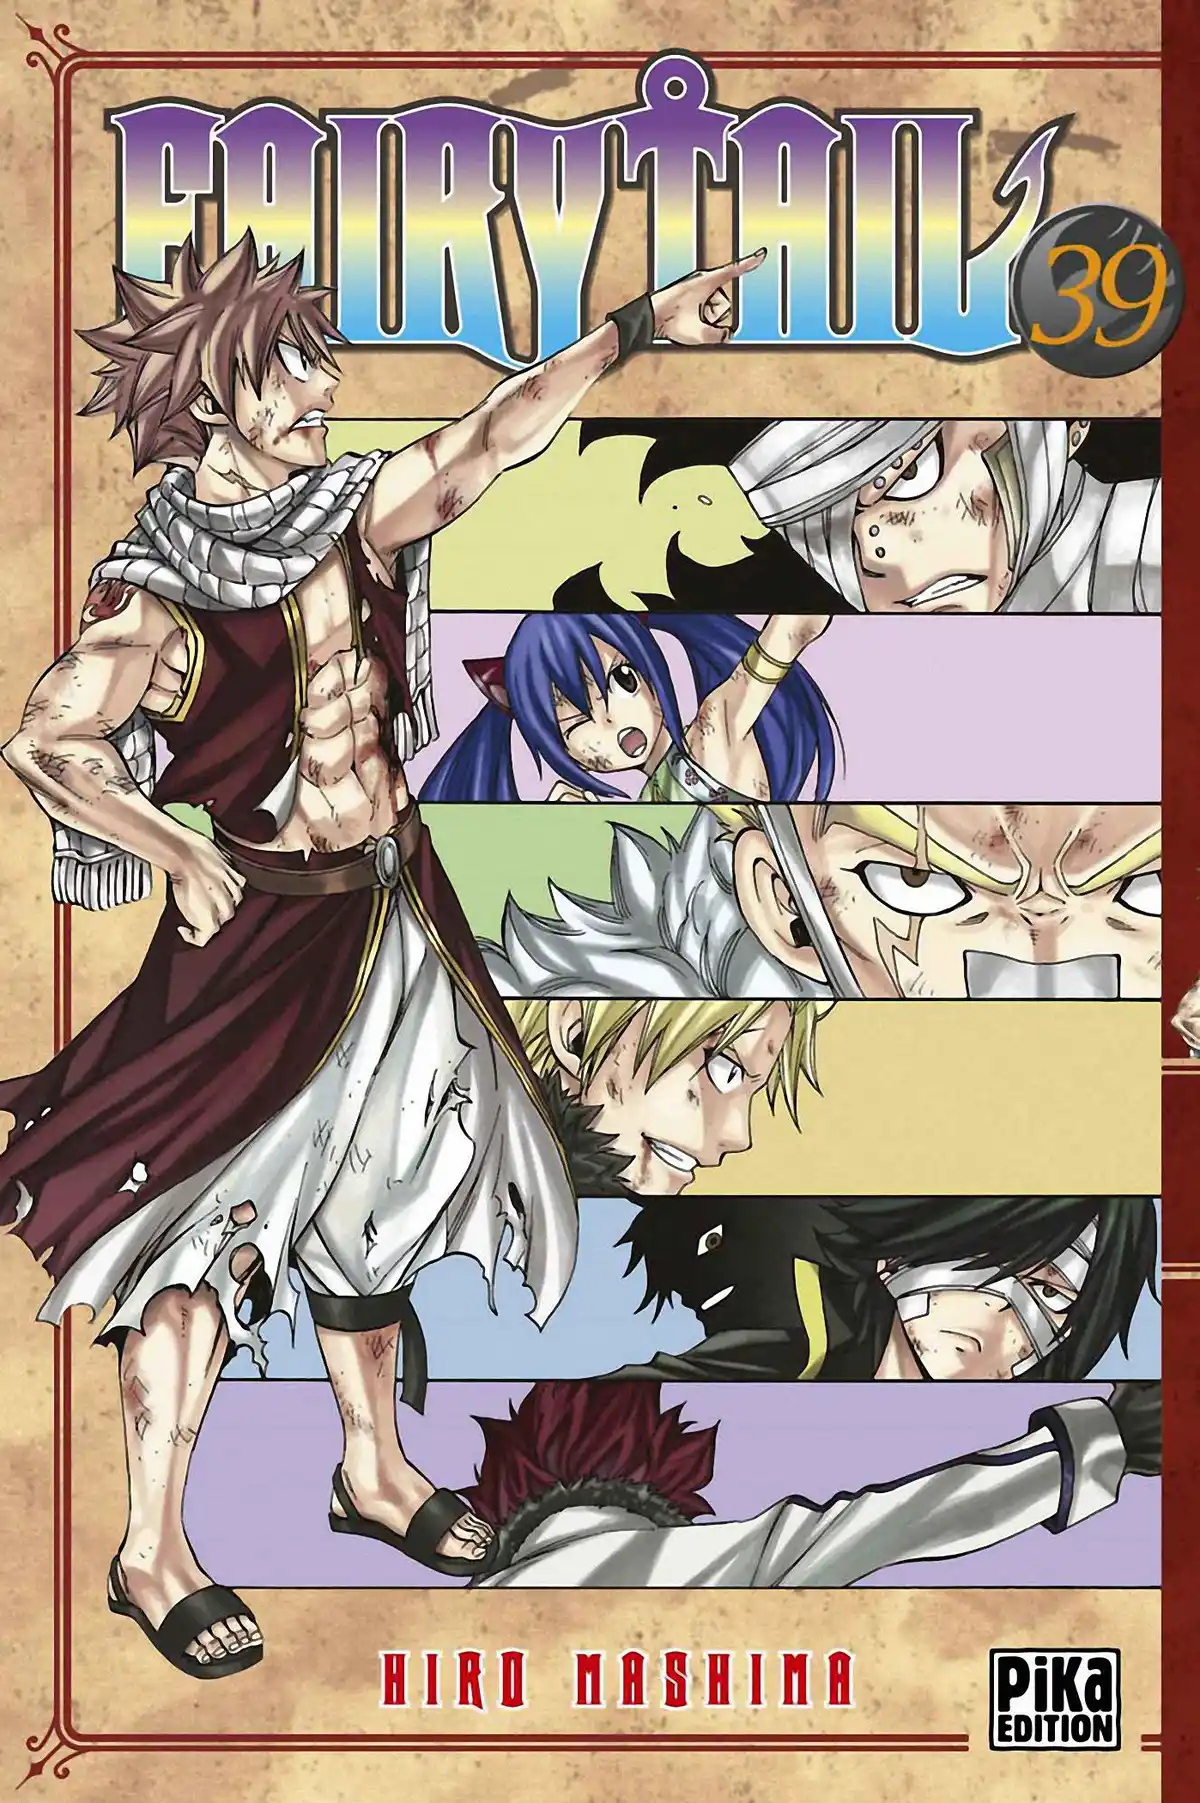 Fairy Tail Volume 39 page 1